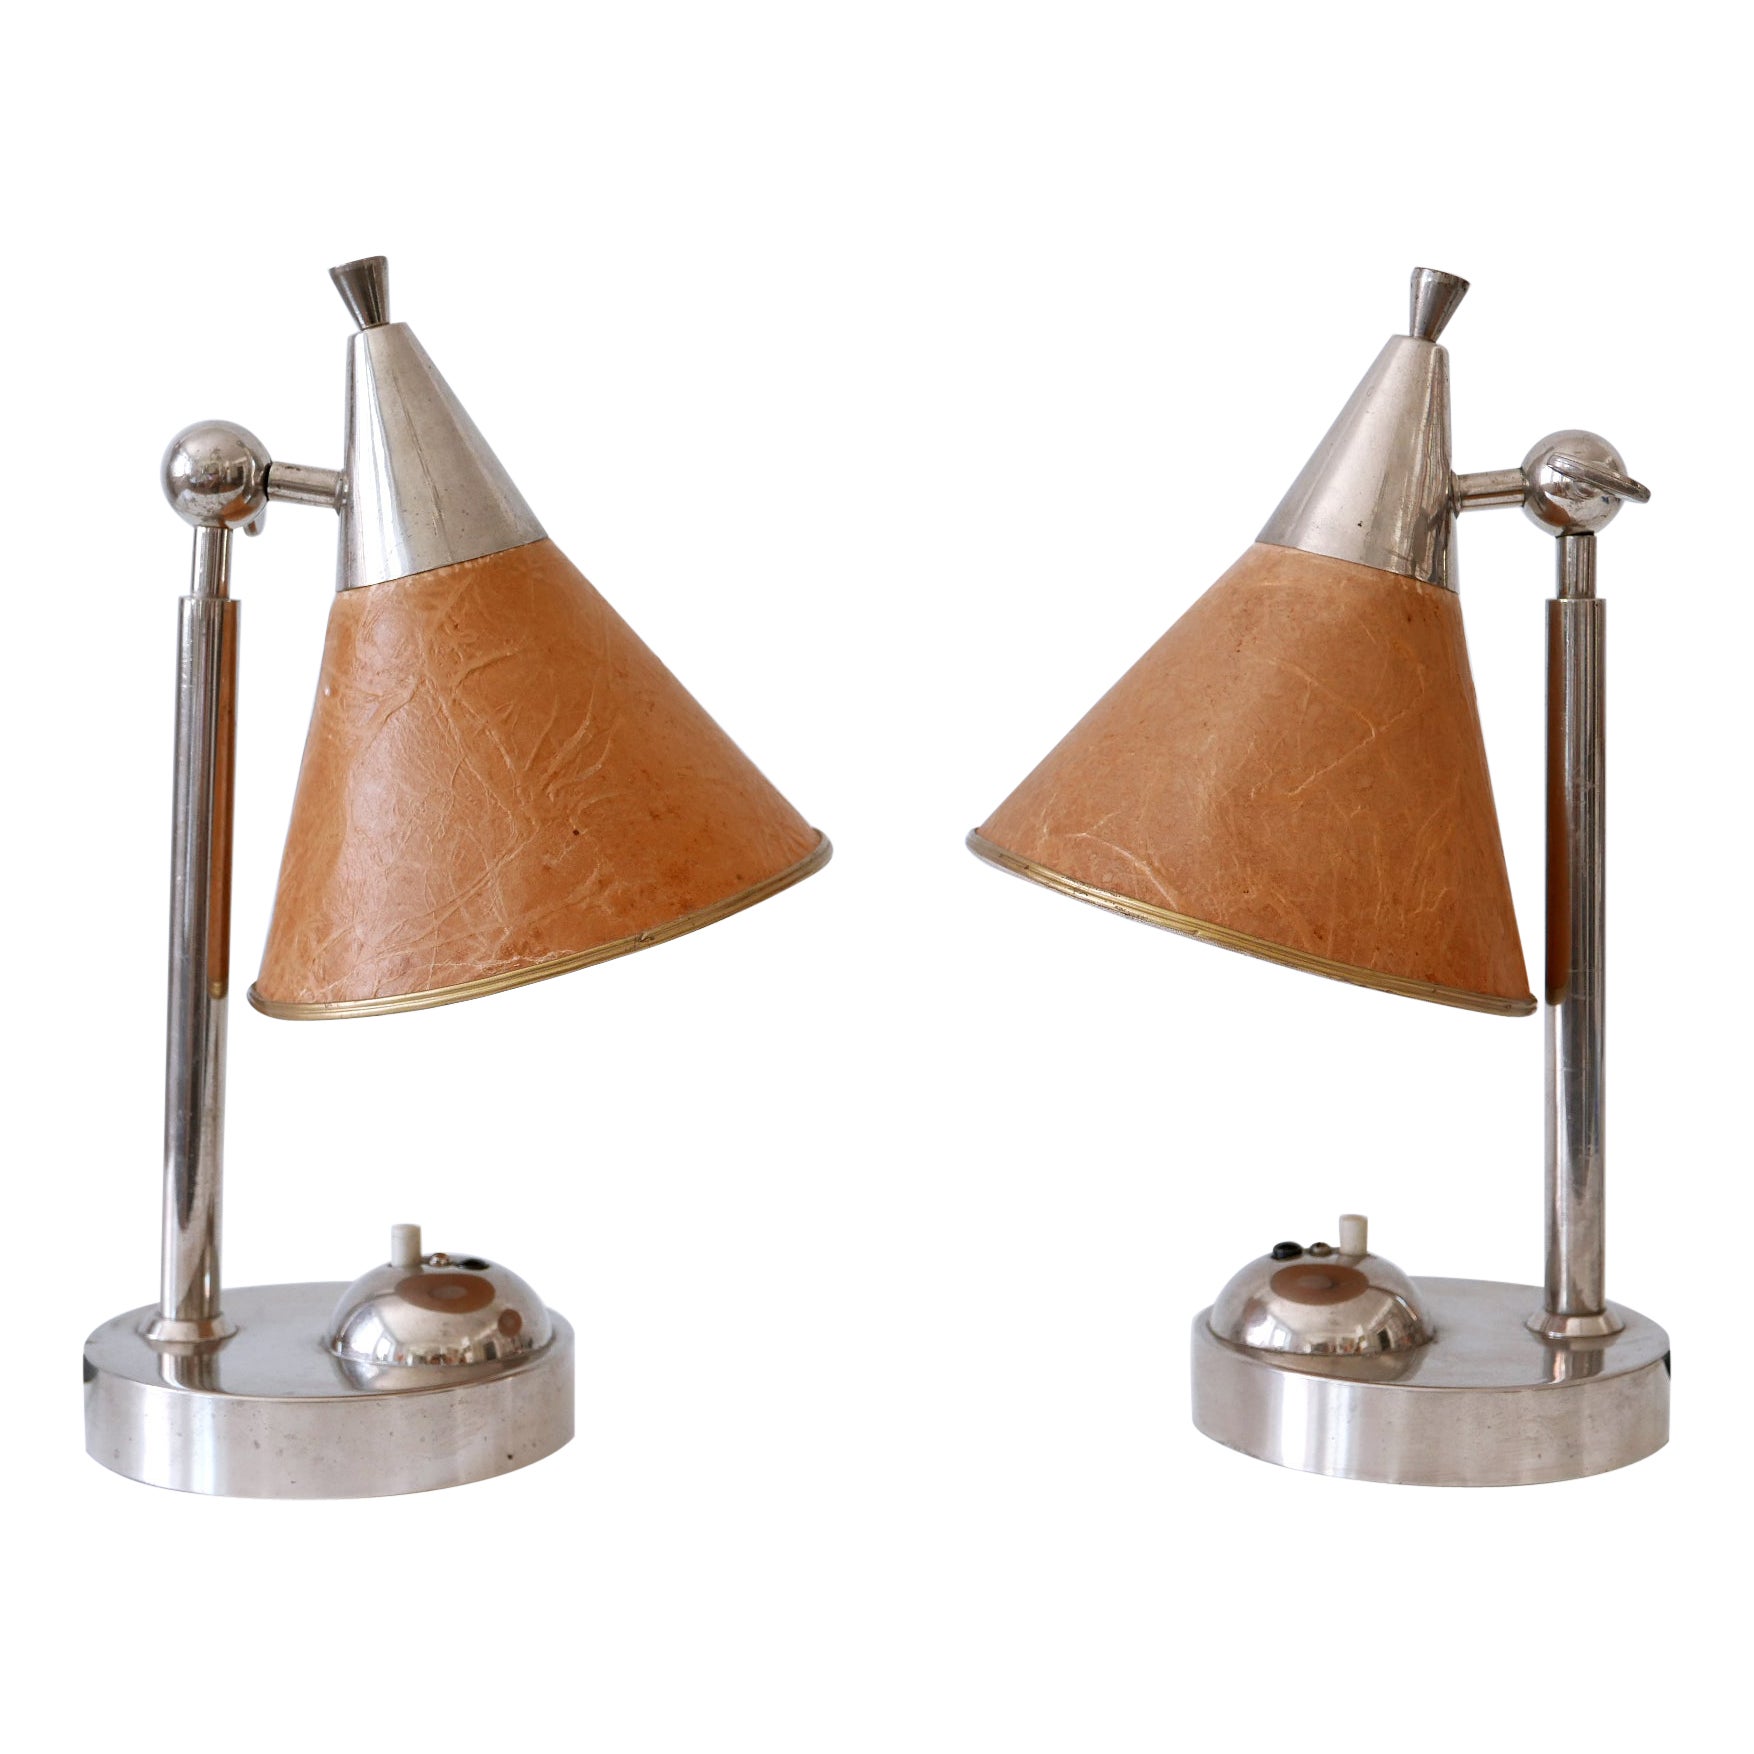 Set of Two Rare Art Deco Bauhaus Bedside Table Lamps or Sconces Germany 1920s For Sale